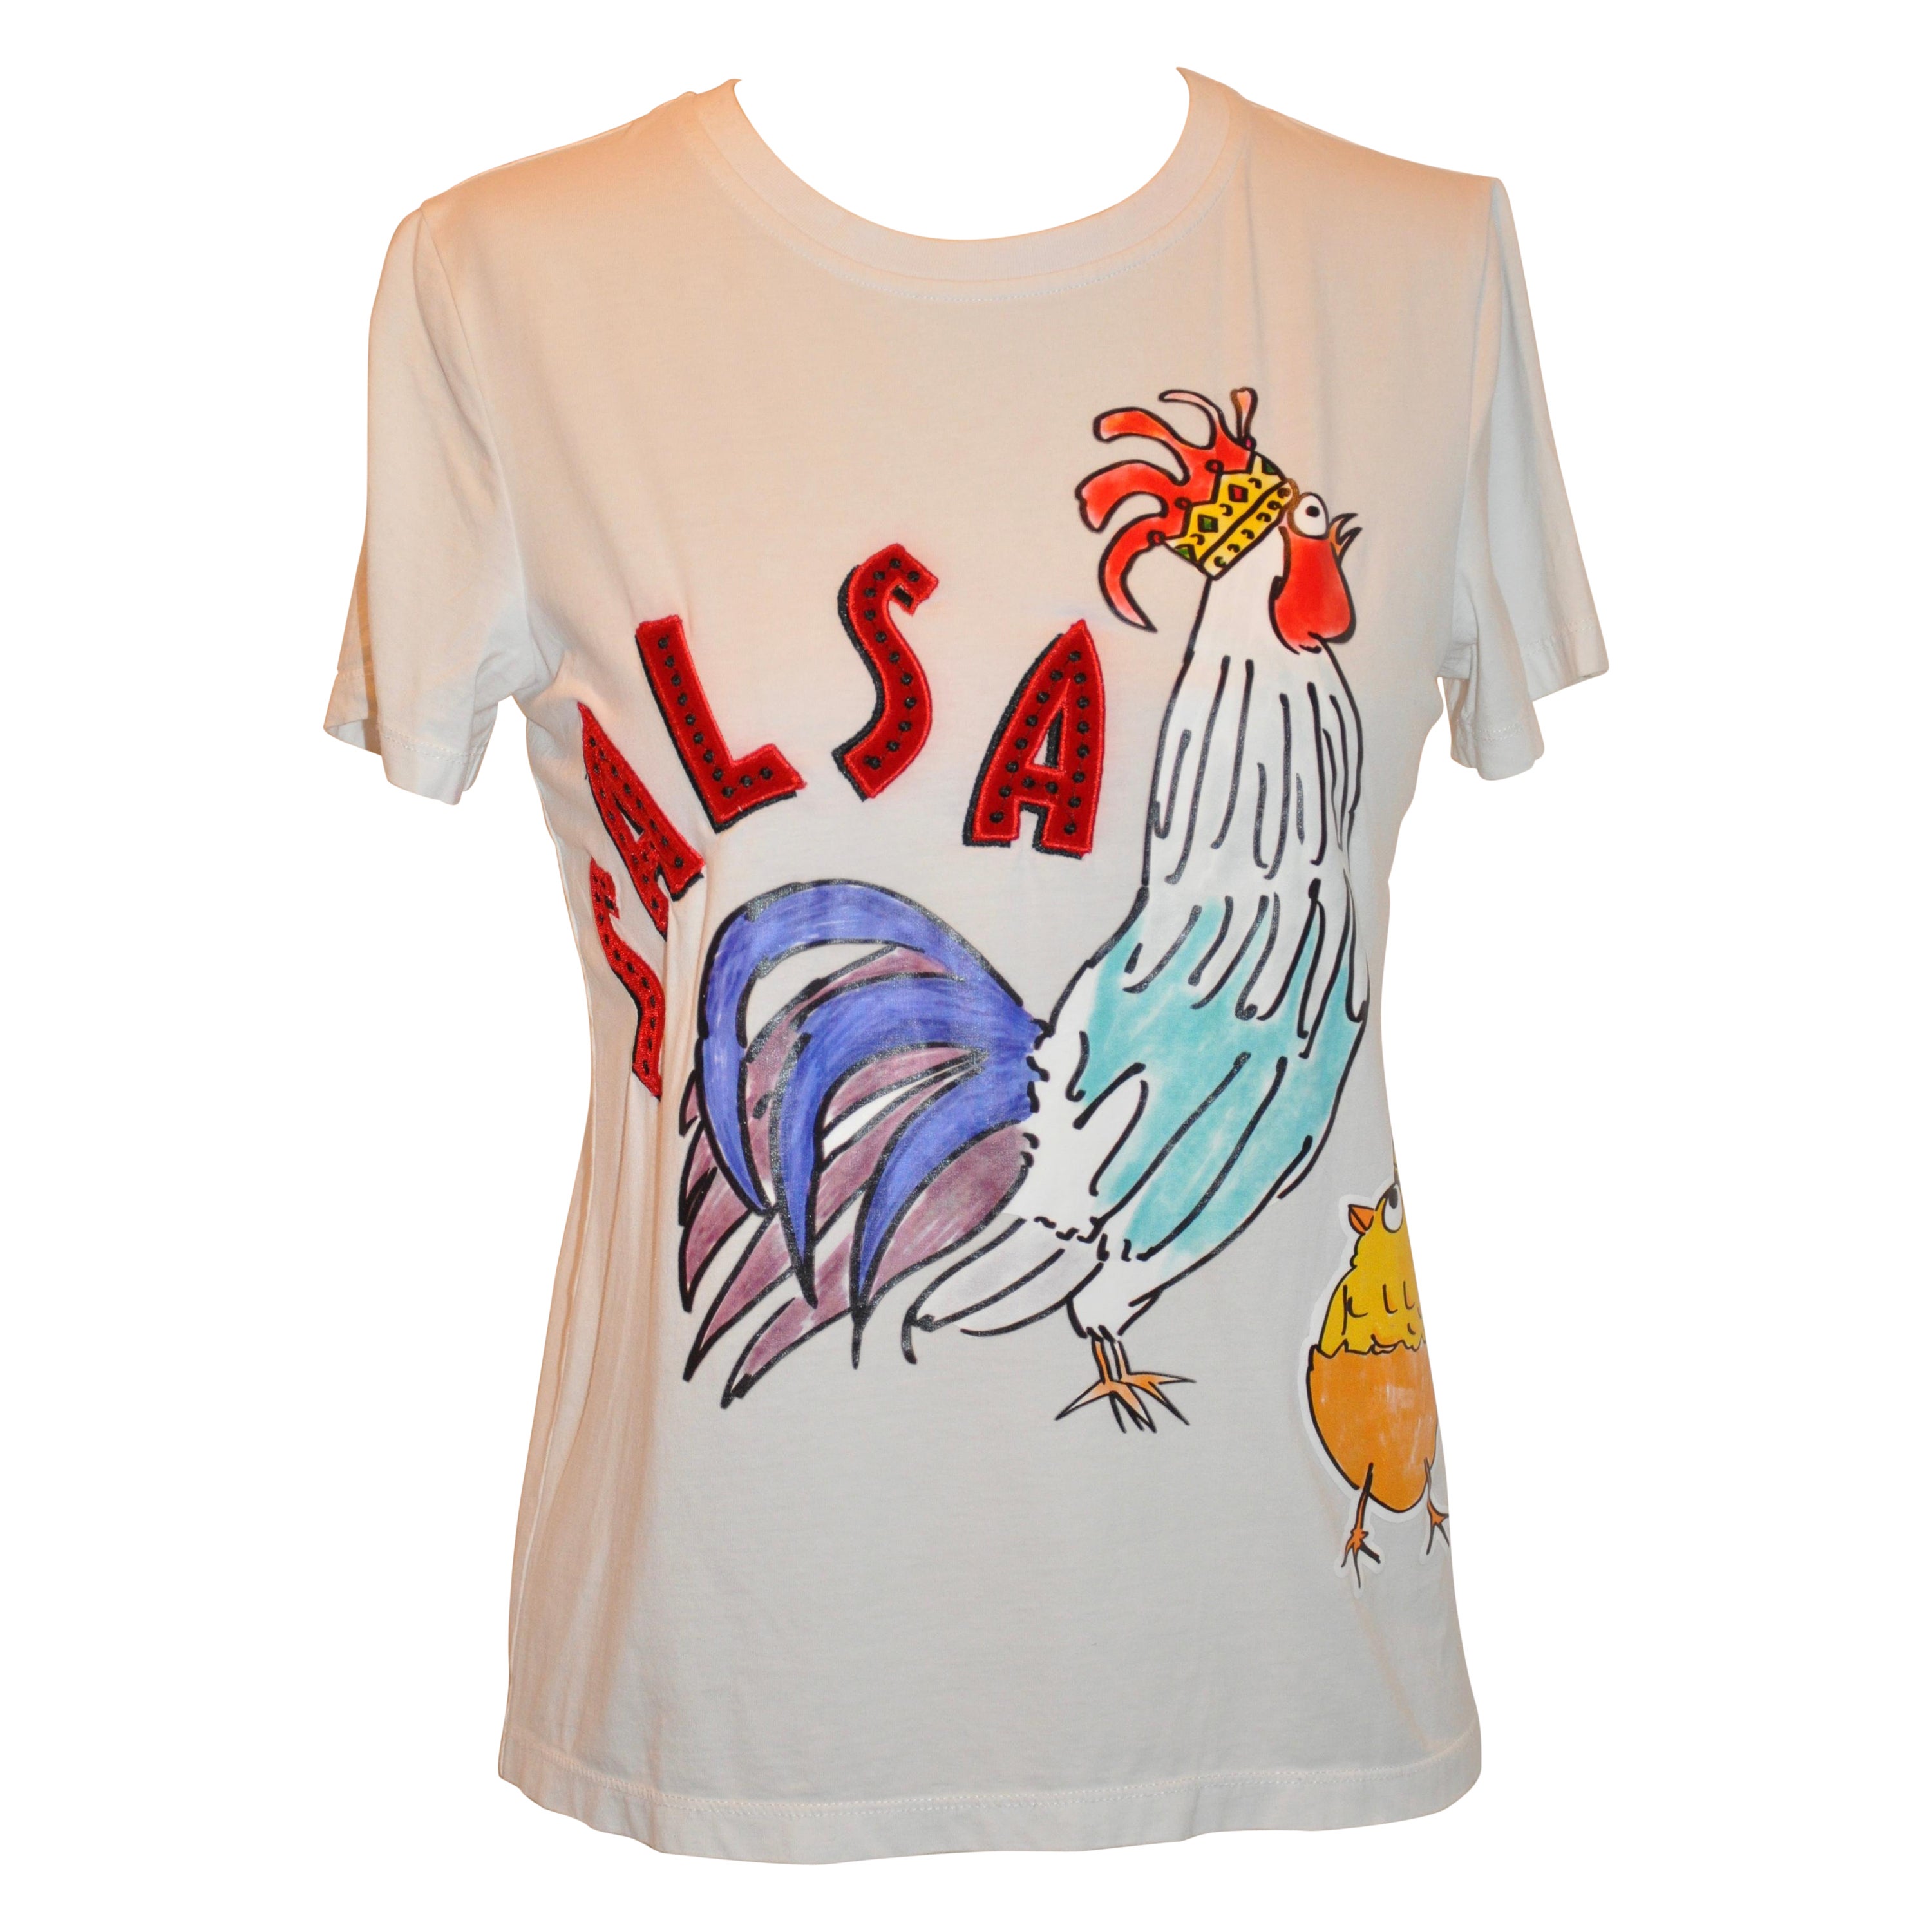 Dolce & Gabbana Comical "Salsa" "Year of The Rooster" 2017 Tee For Sale